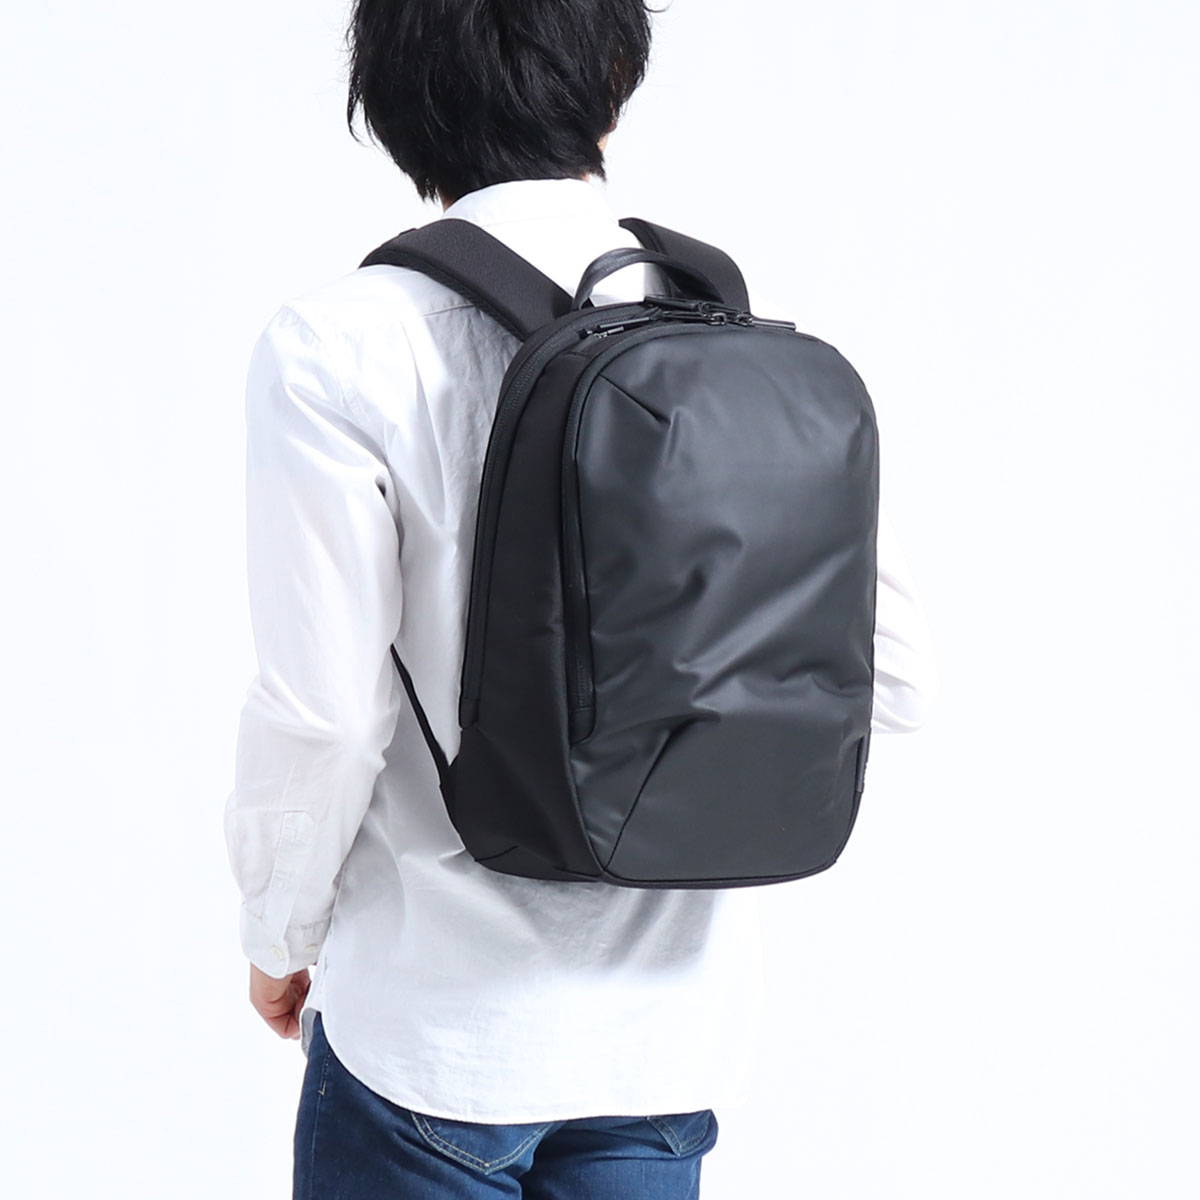 Aer エアー Day Pack 231009 14.8L リュッ ク